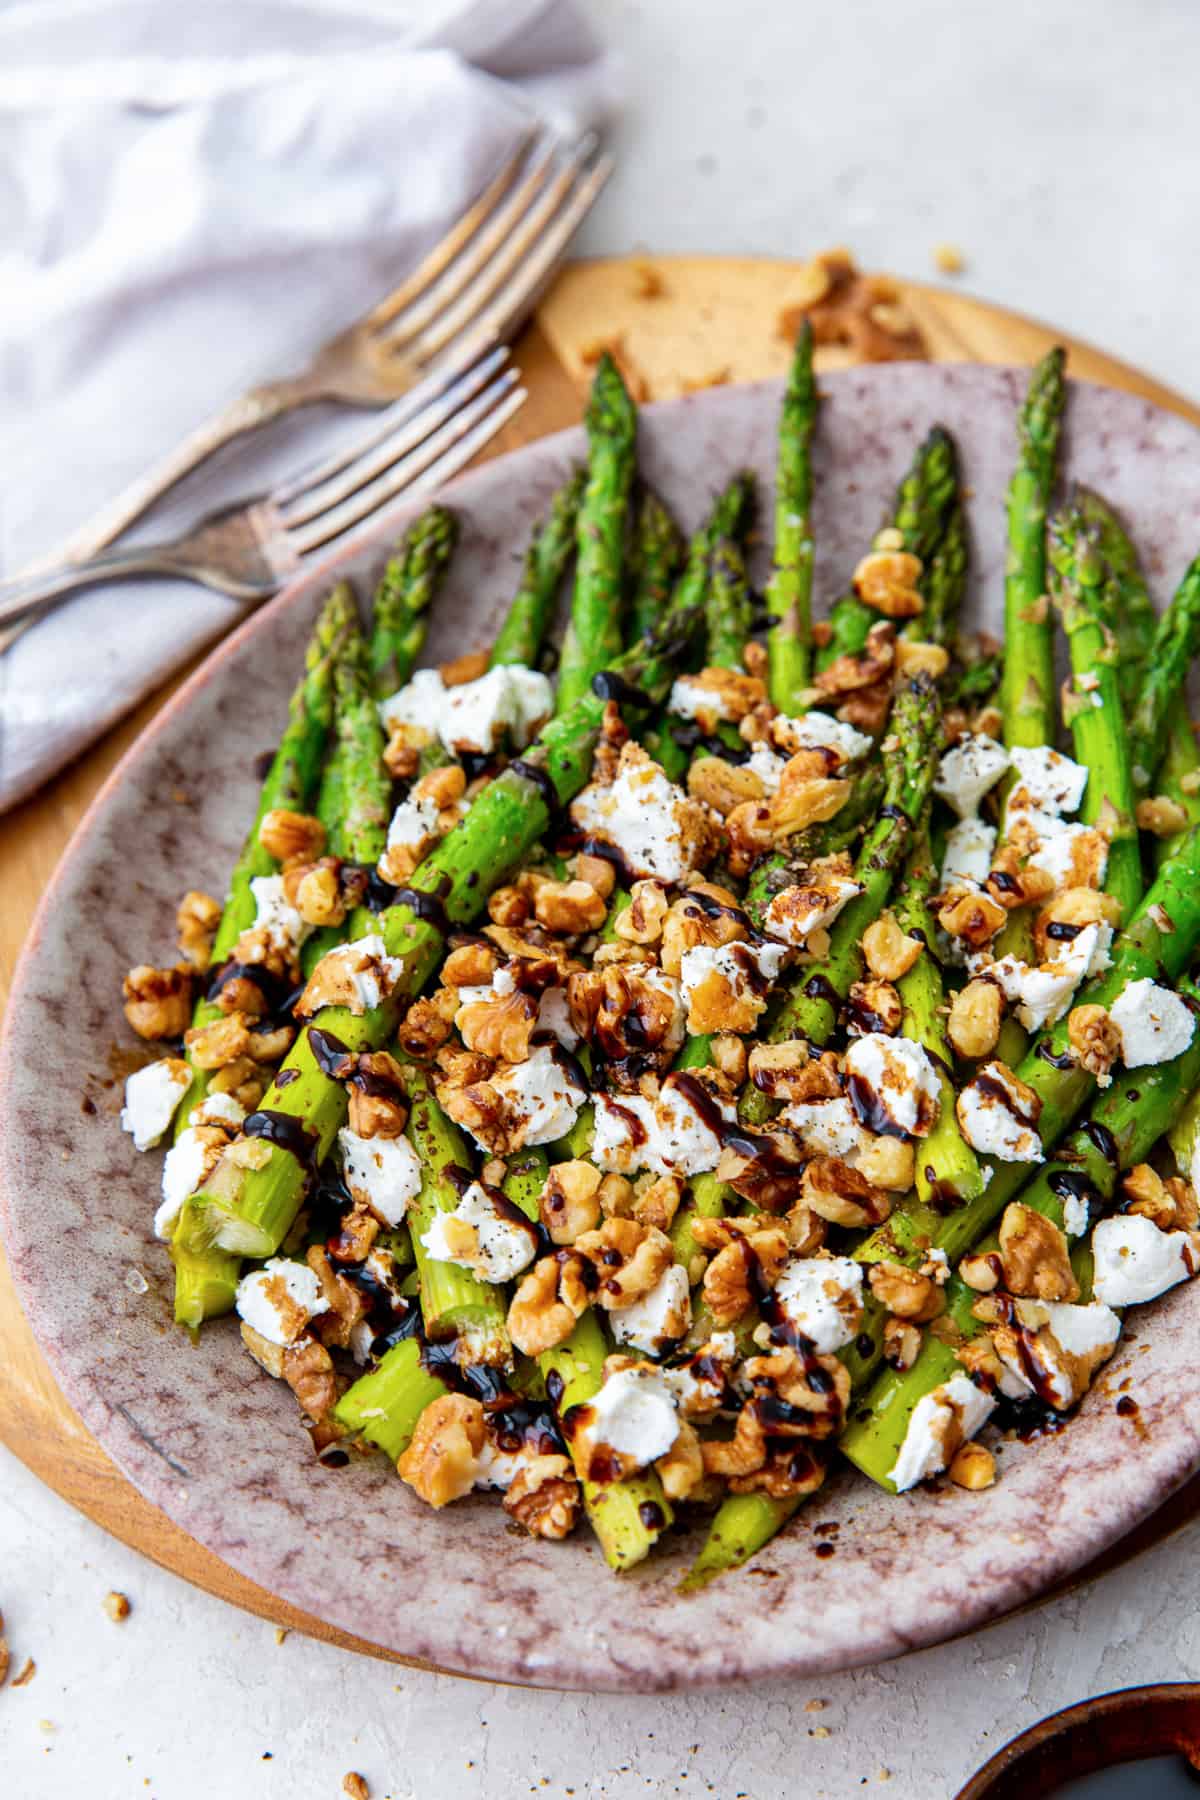 Roasted asparagus with goat cheese, walnuts, and balsamic on a platter.